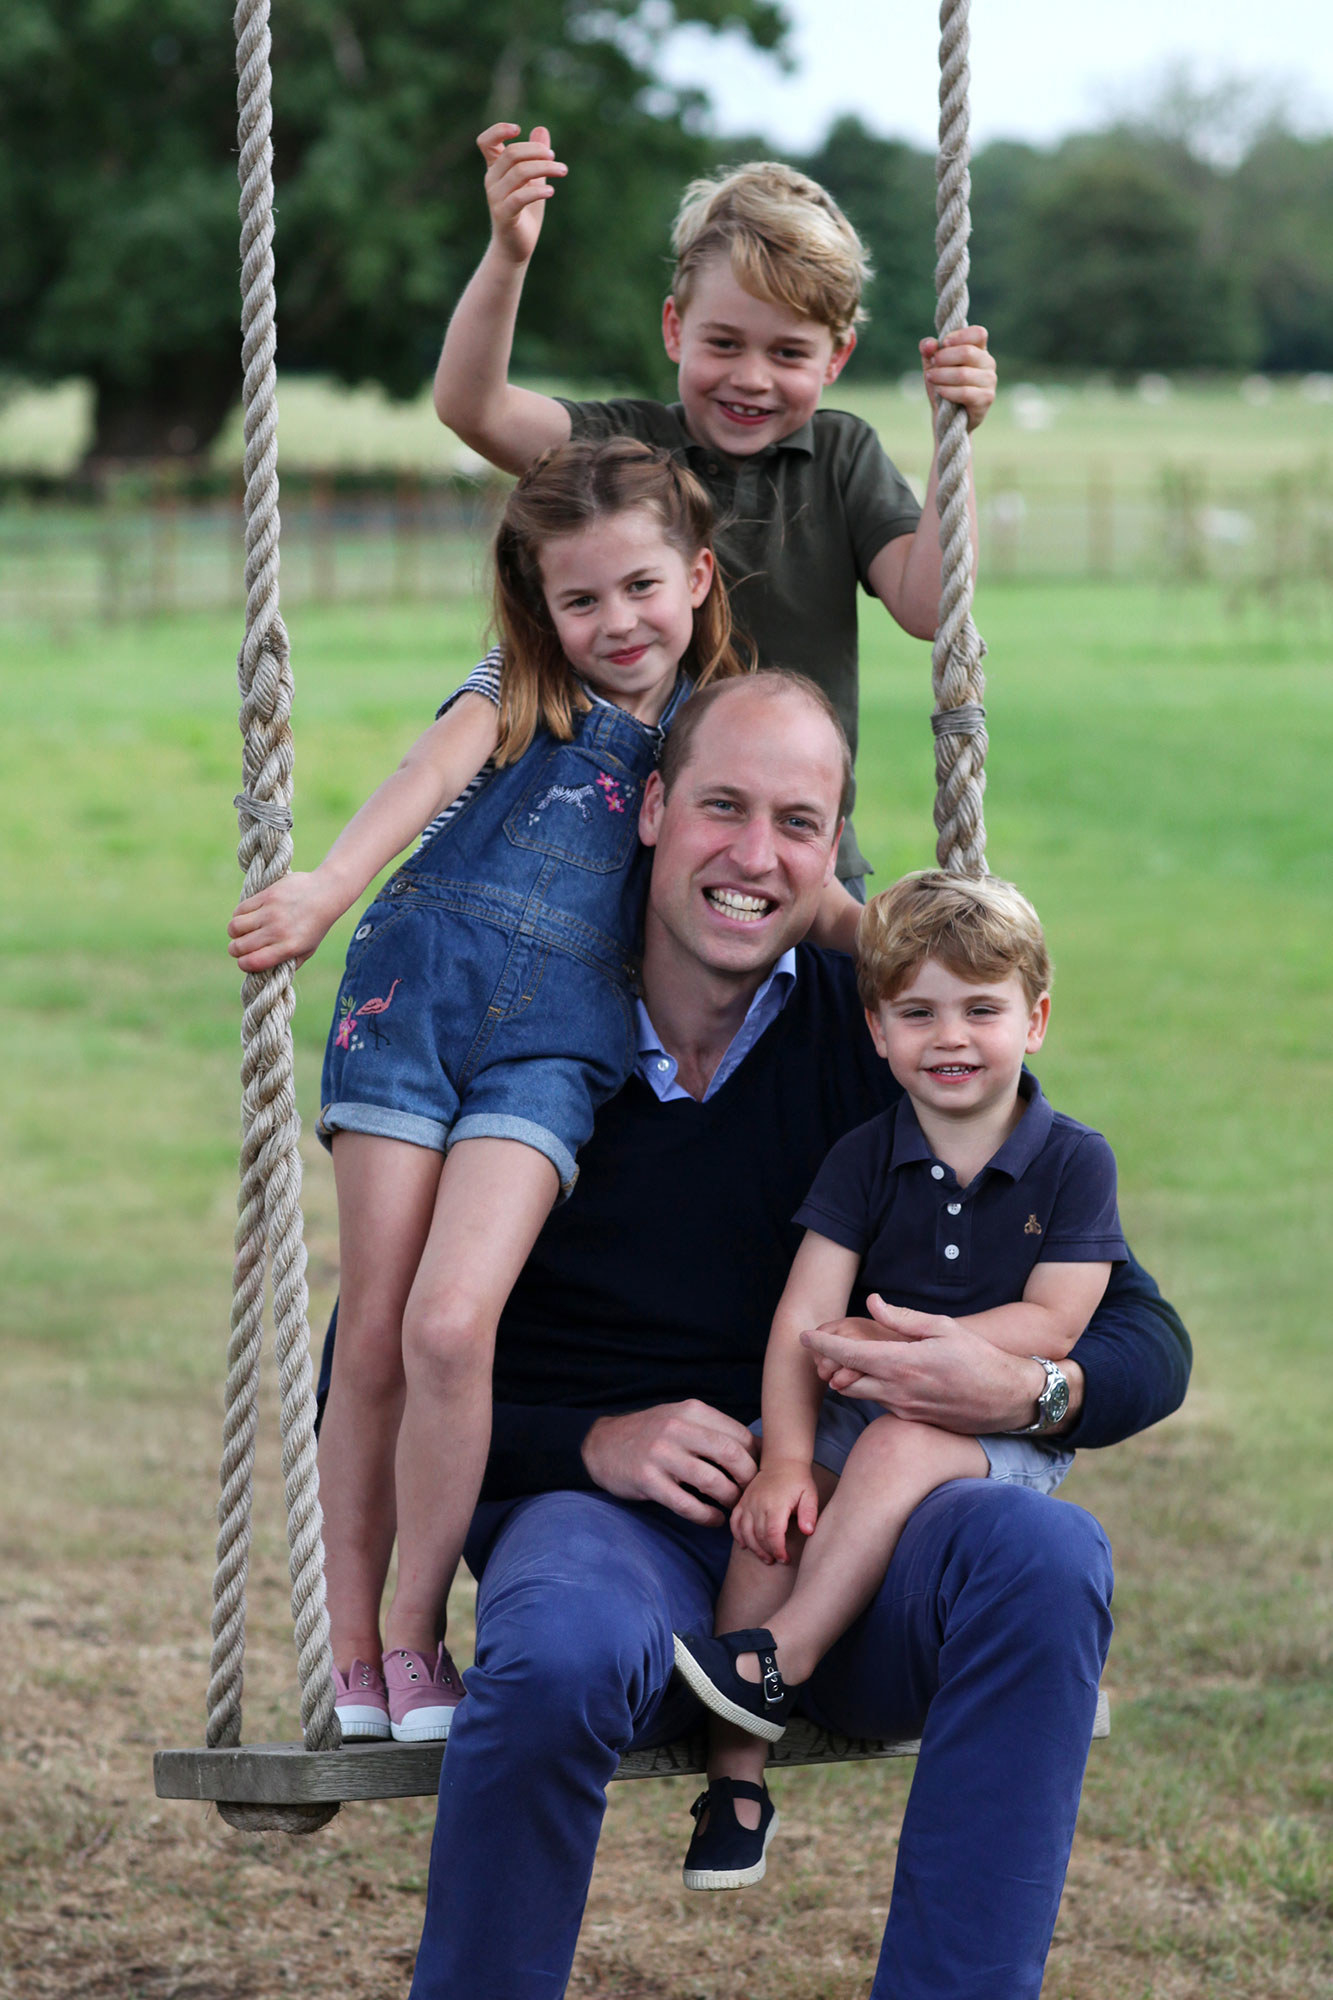 William sitting on a swing with one son sitting on his lap and two of his other children standing